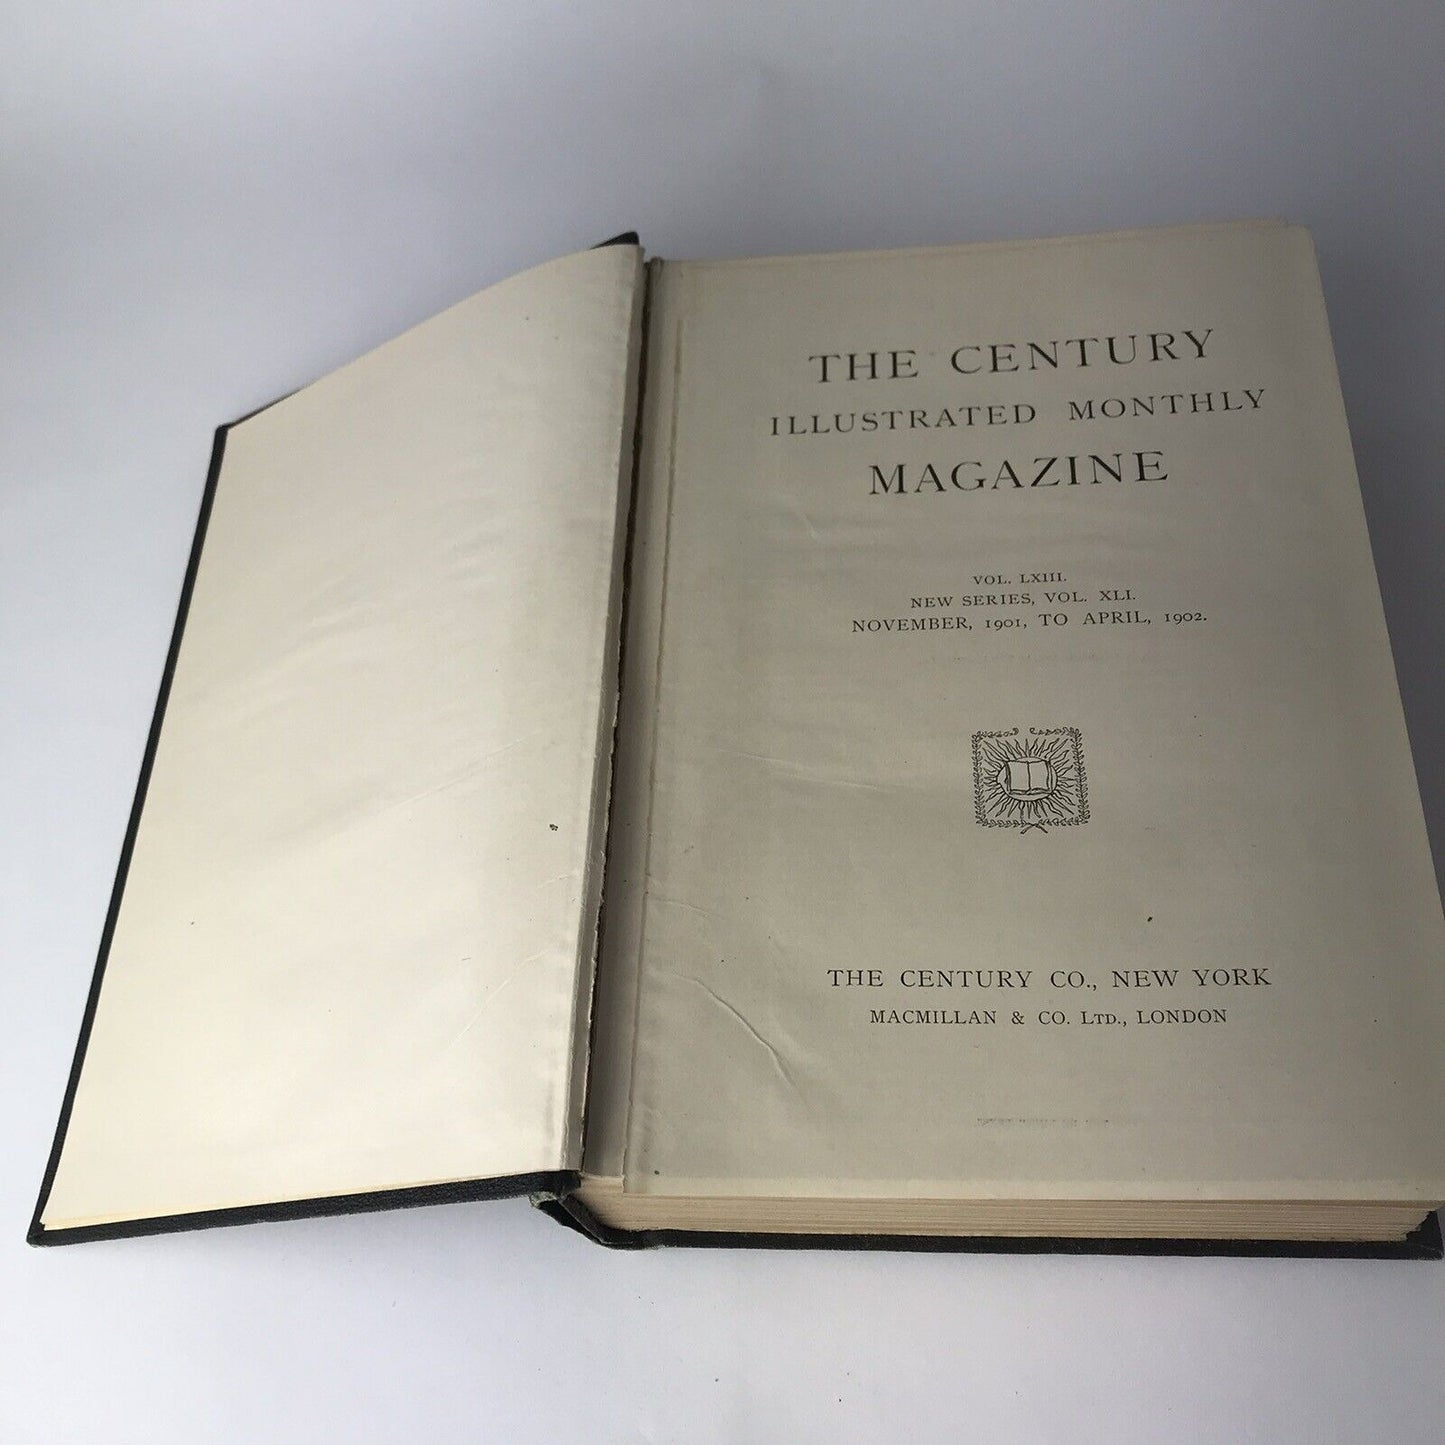 Antique 1902 Book “A Year Of The Century” Volume 1 The Century Co, New York